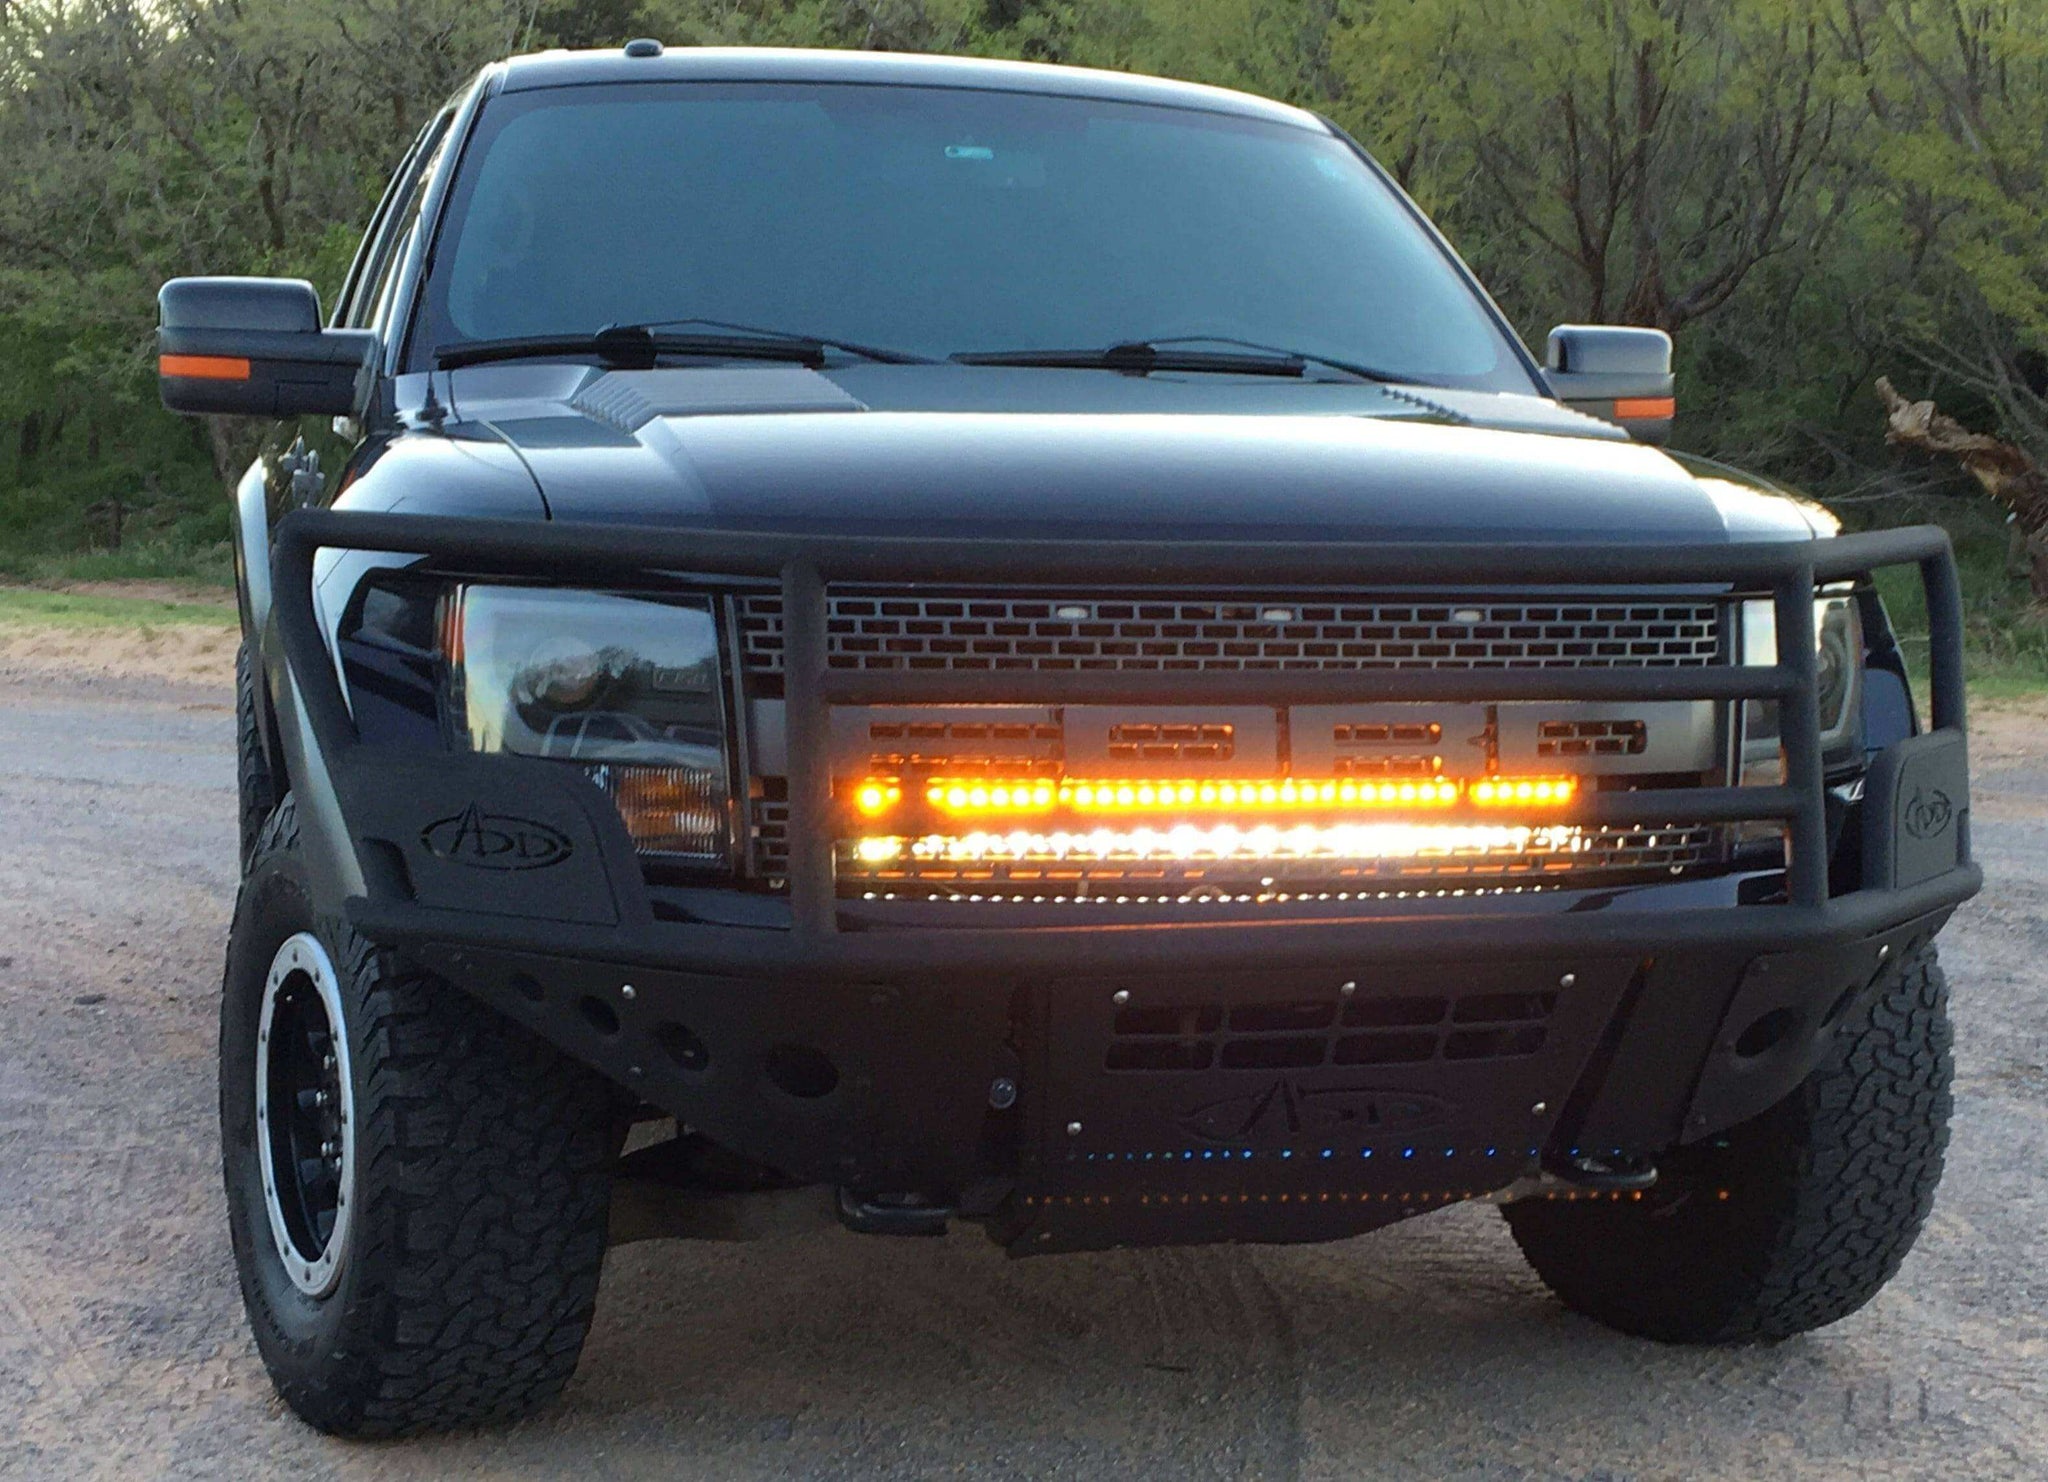 2010 2011 2012 2023 2014 FORD RAPTOR DUAL 40in LIGHT BARS color white and amber behind the grille by M&R Automotive